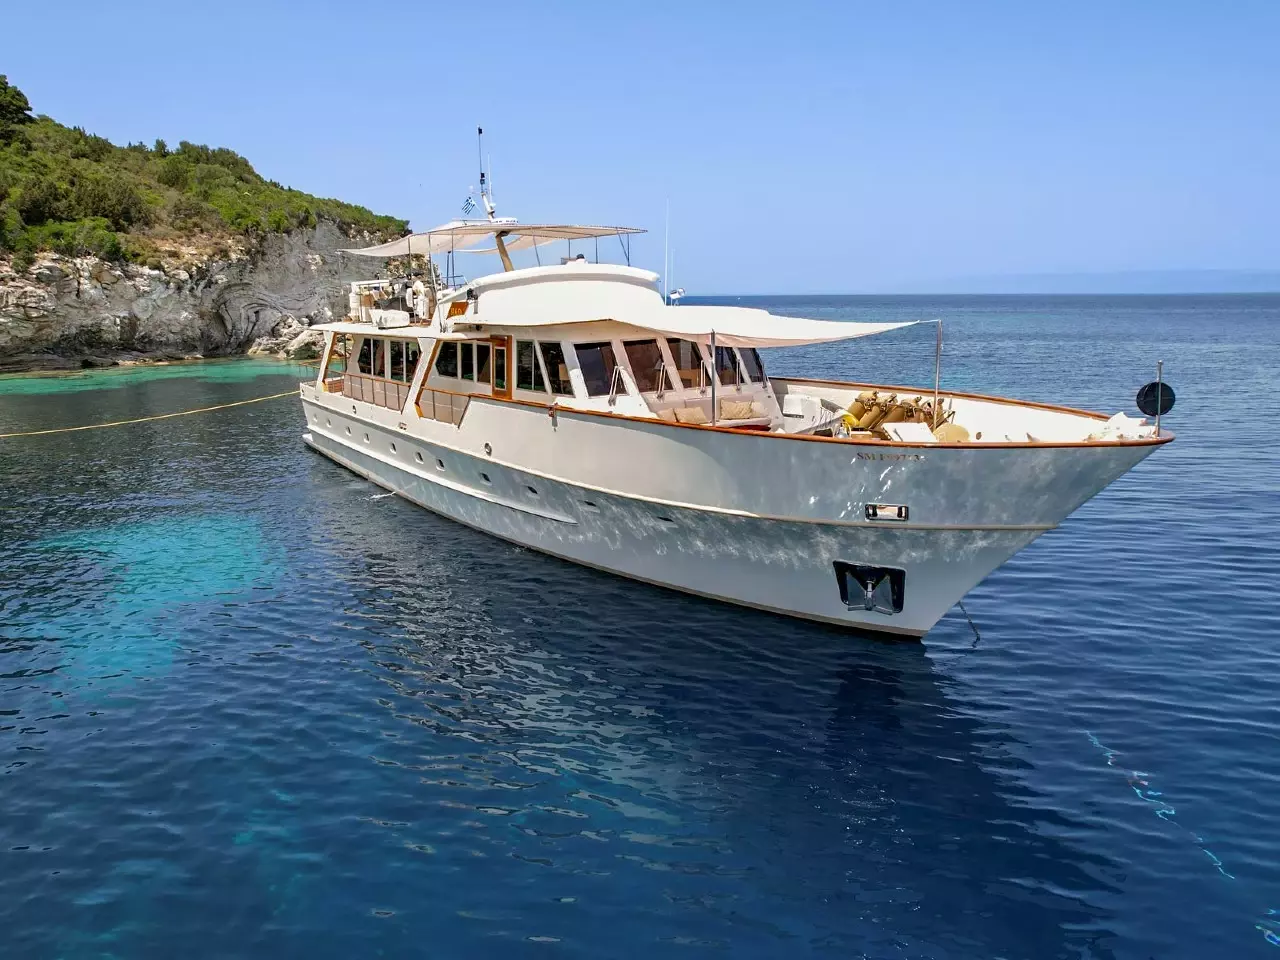 Stalca by Visch - Top rates for a Charter of a private Motor Yacht in Greece